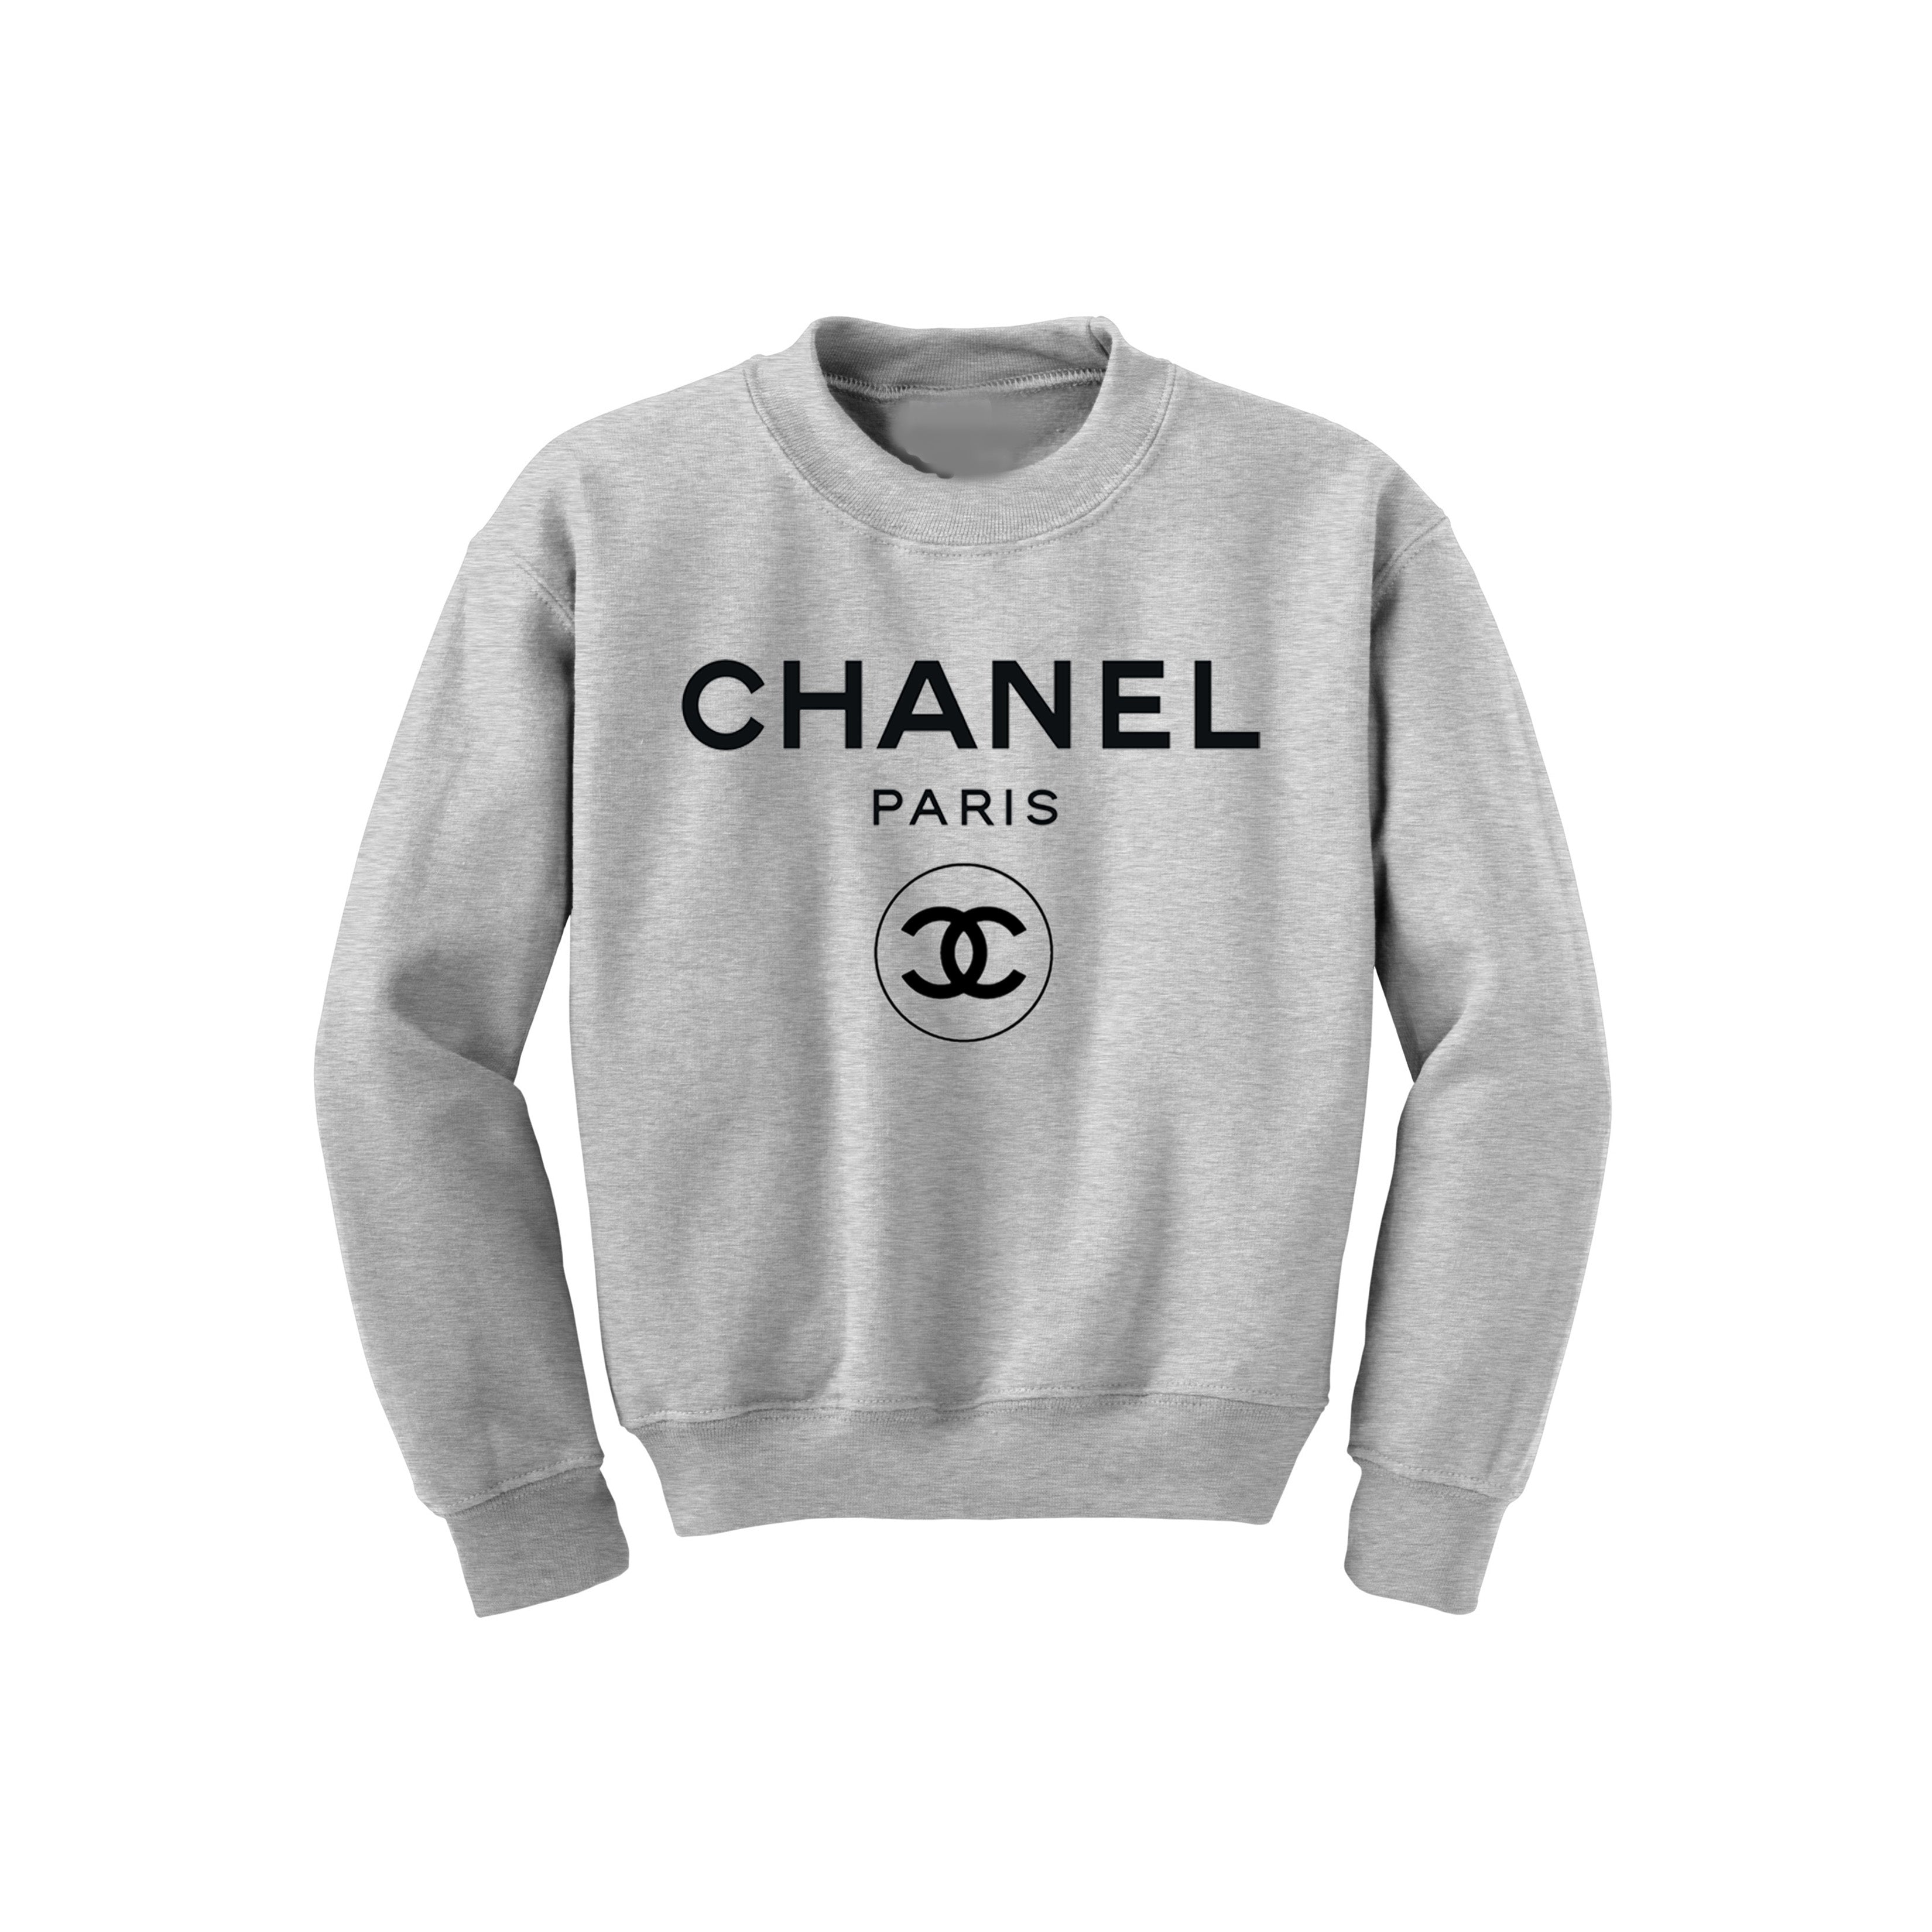 Will Work for Chanel Sweatshirt (Various Colors) – Gold Peach Apparel